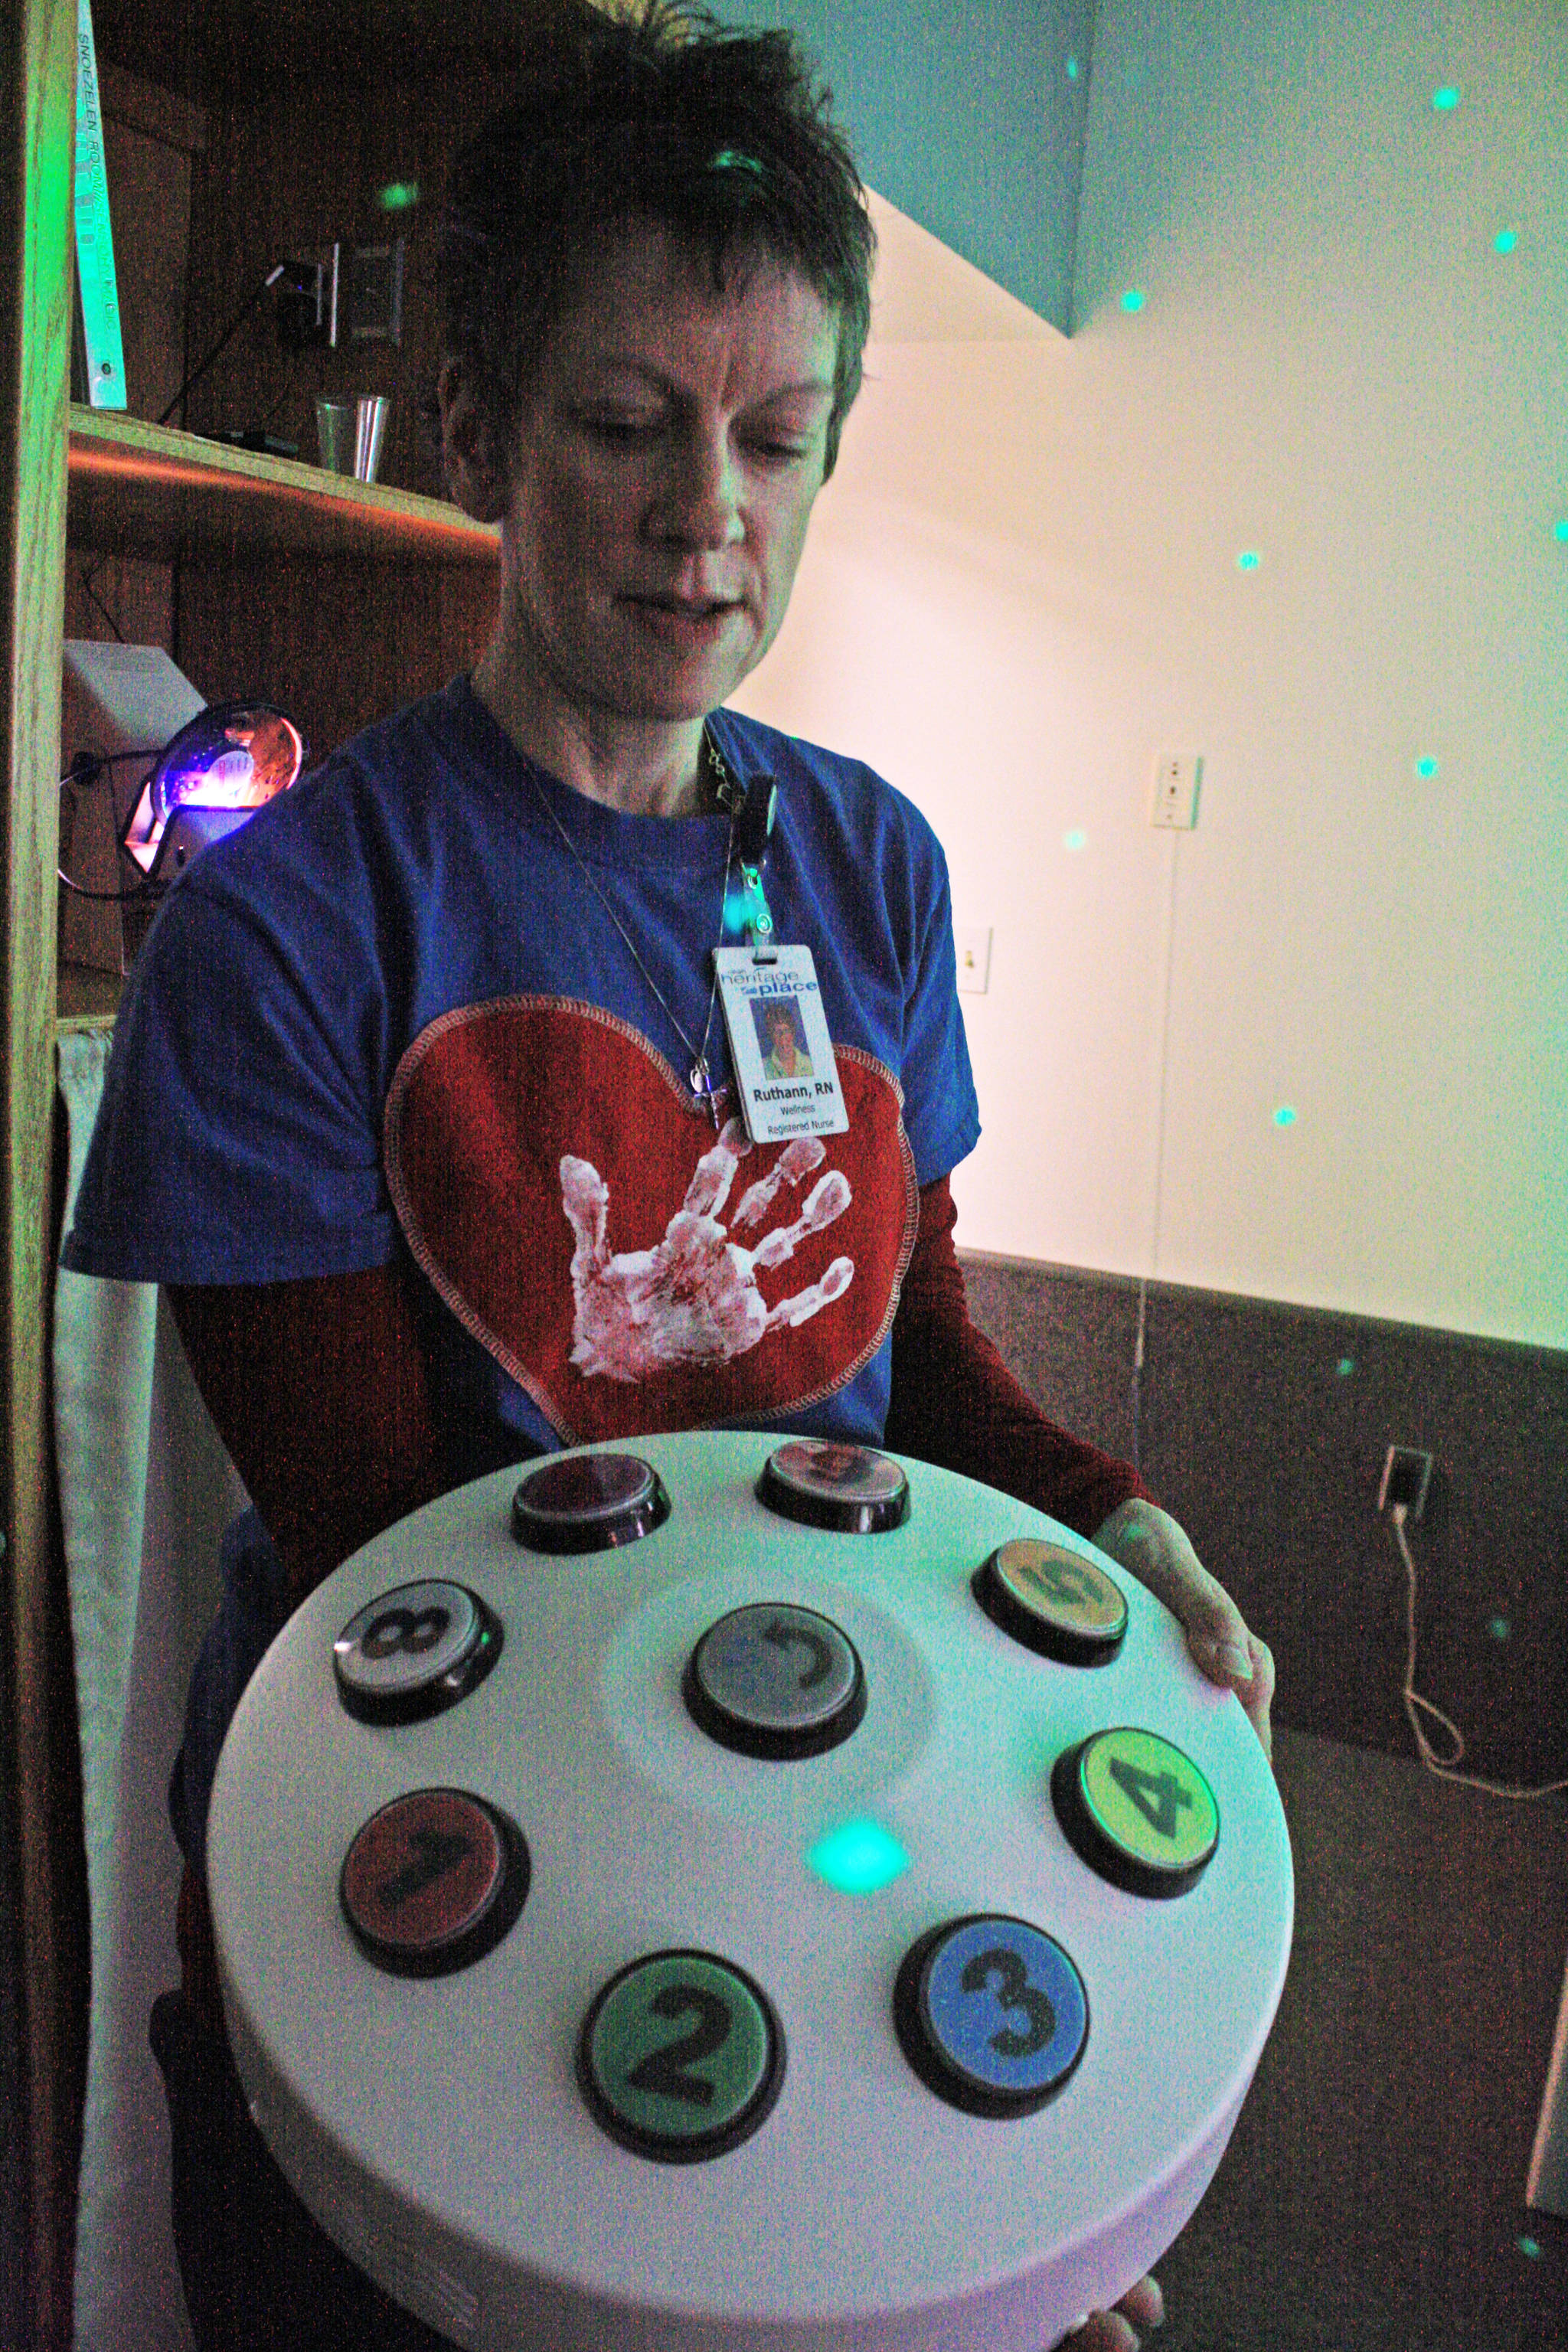 Ruthann Truesdell, Heritage Place staff training coordinator, discusses an interface that residents can use to change the lighting in the home’s new Snoezelen room, which provides an interactive relaxation experience for residents, on March 23 in Soldotna. (Photo by Erin Thompson/Peninsula Clarion)